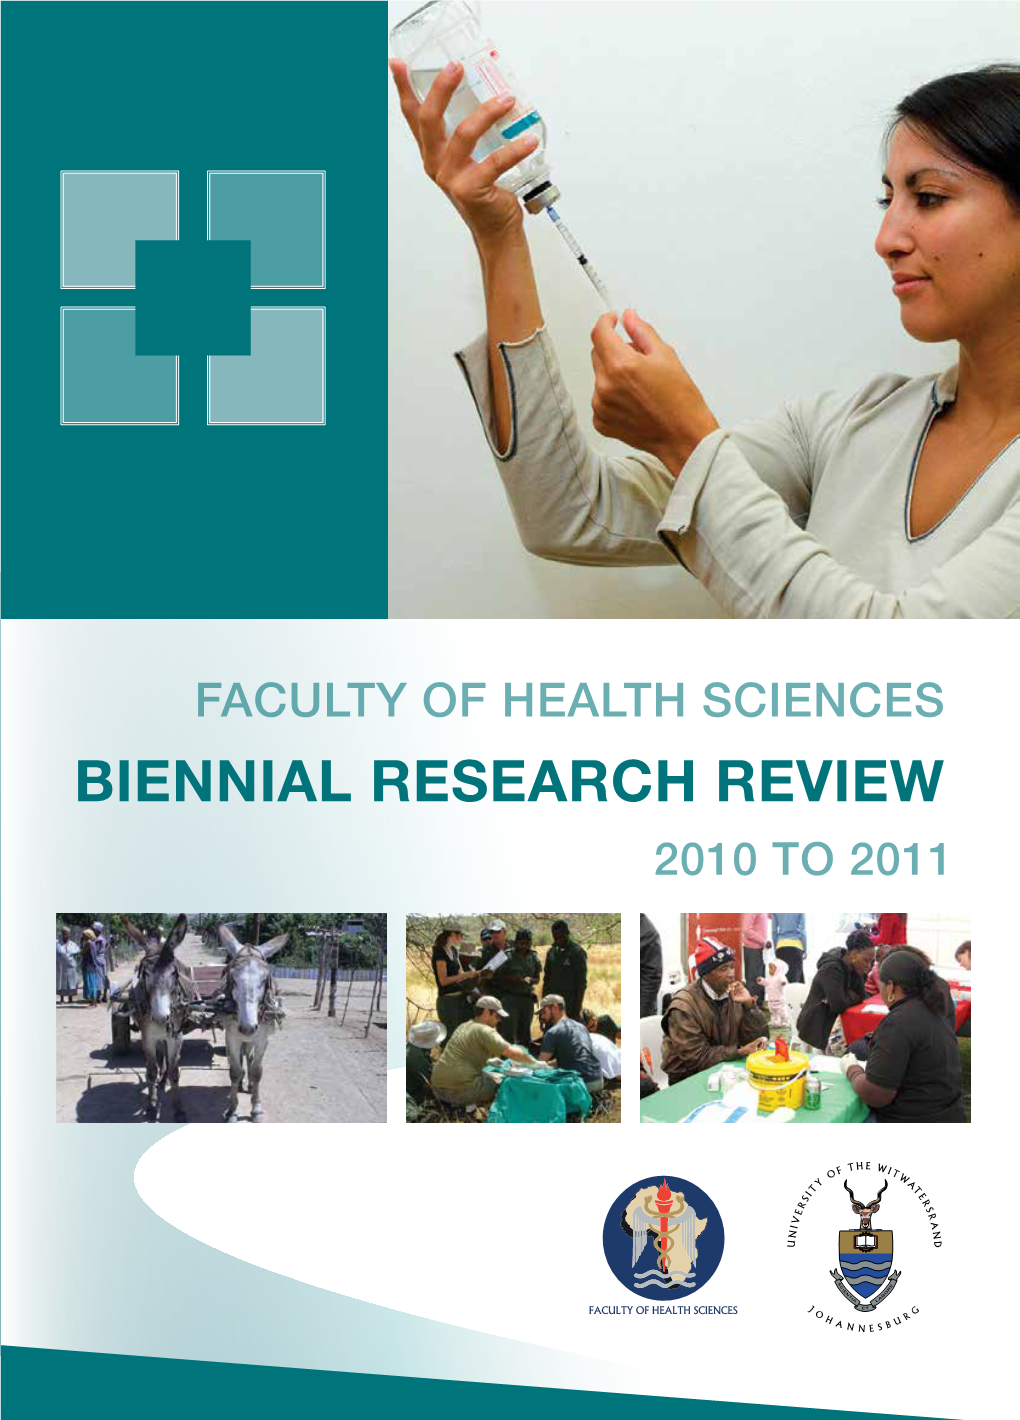 BIENNIAL Research Review 2010 to 2011